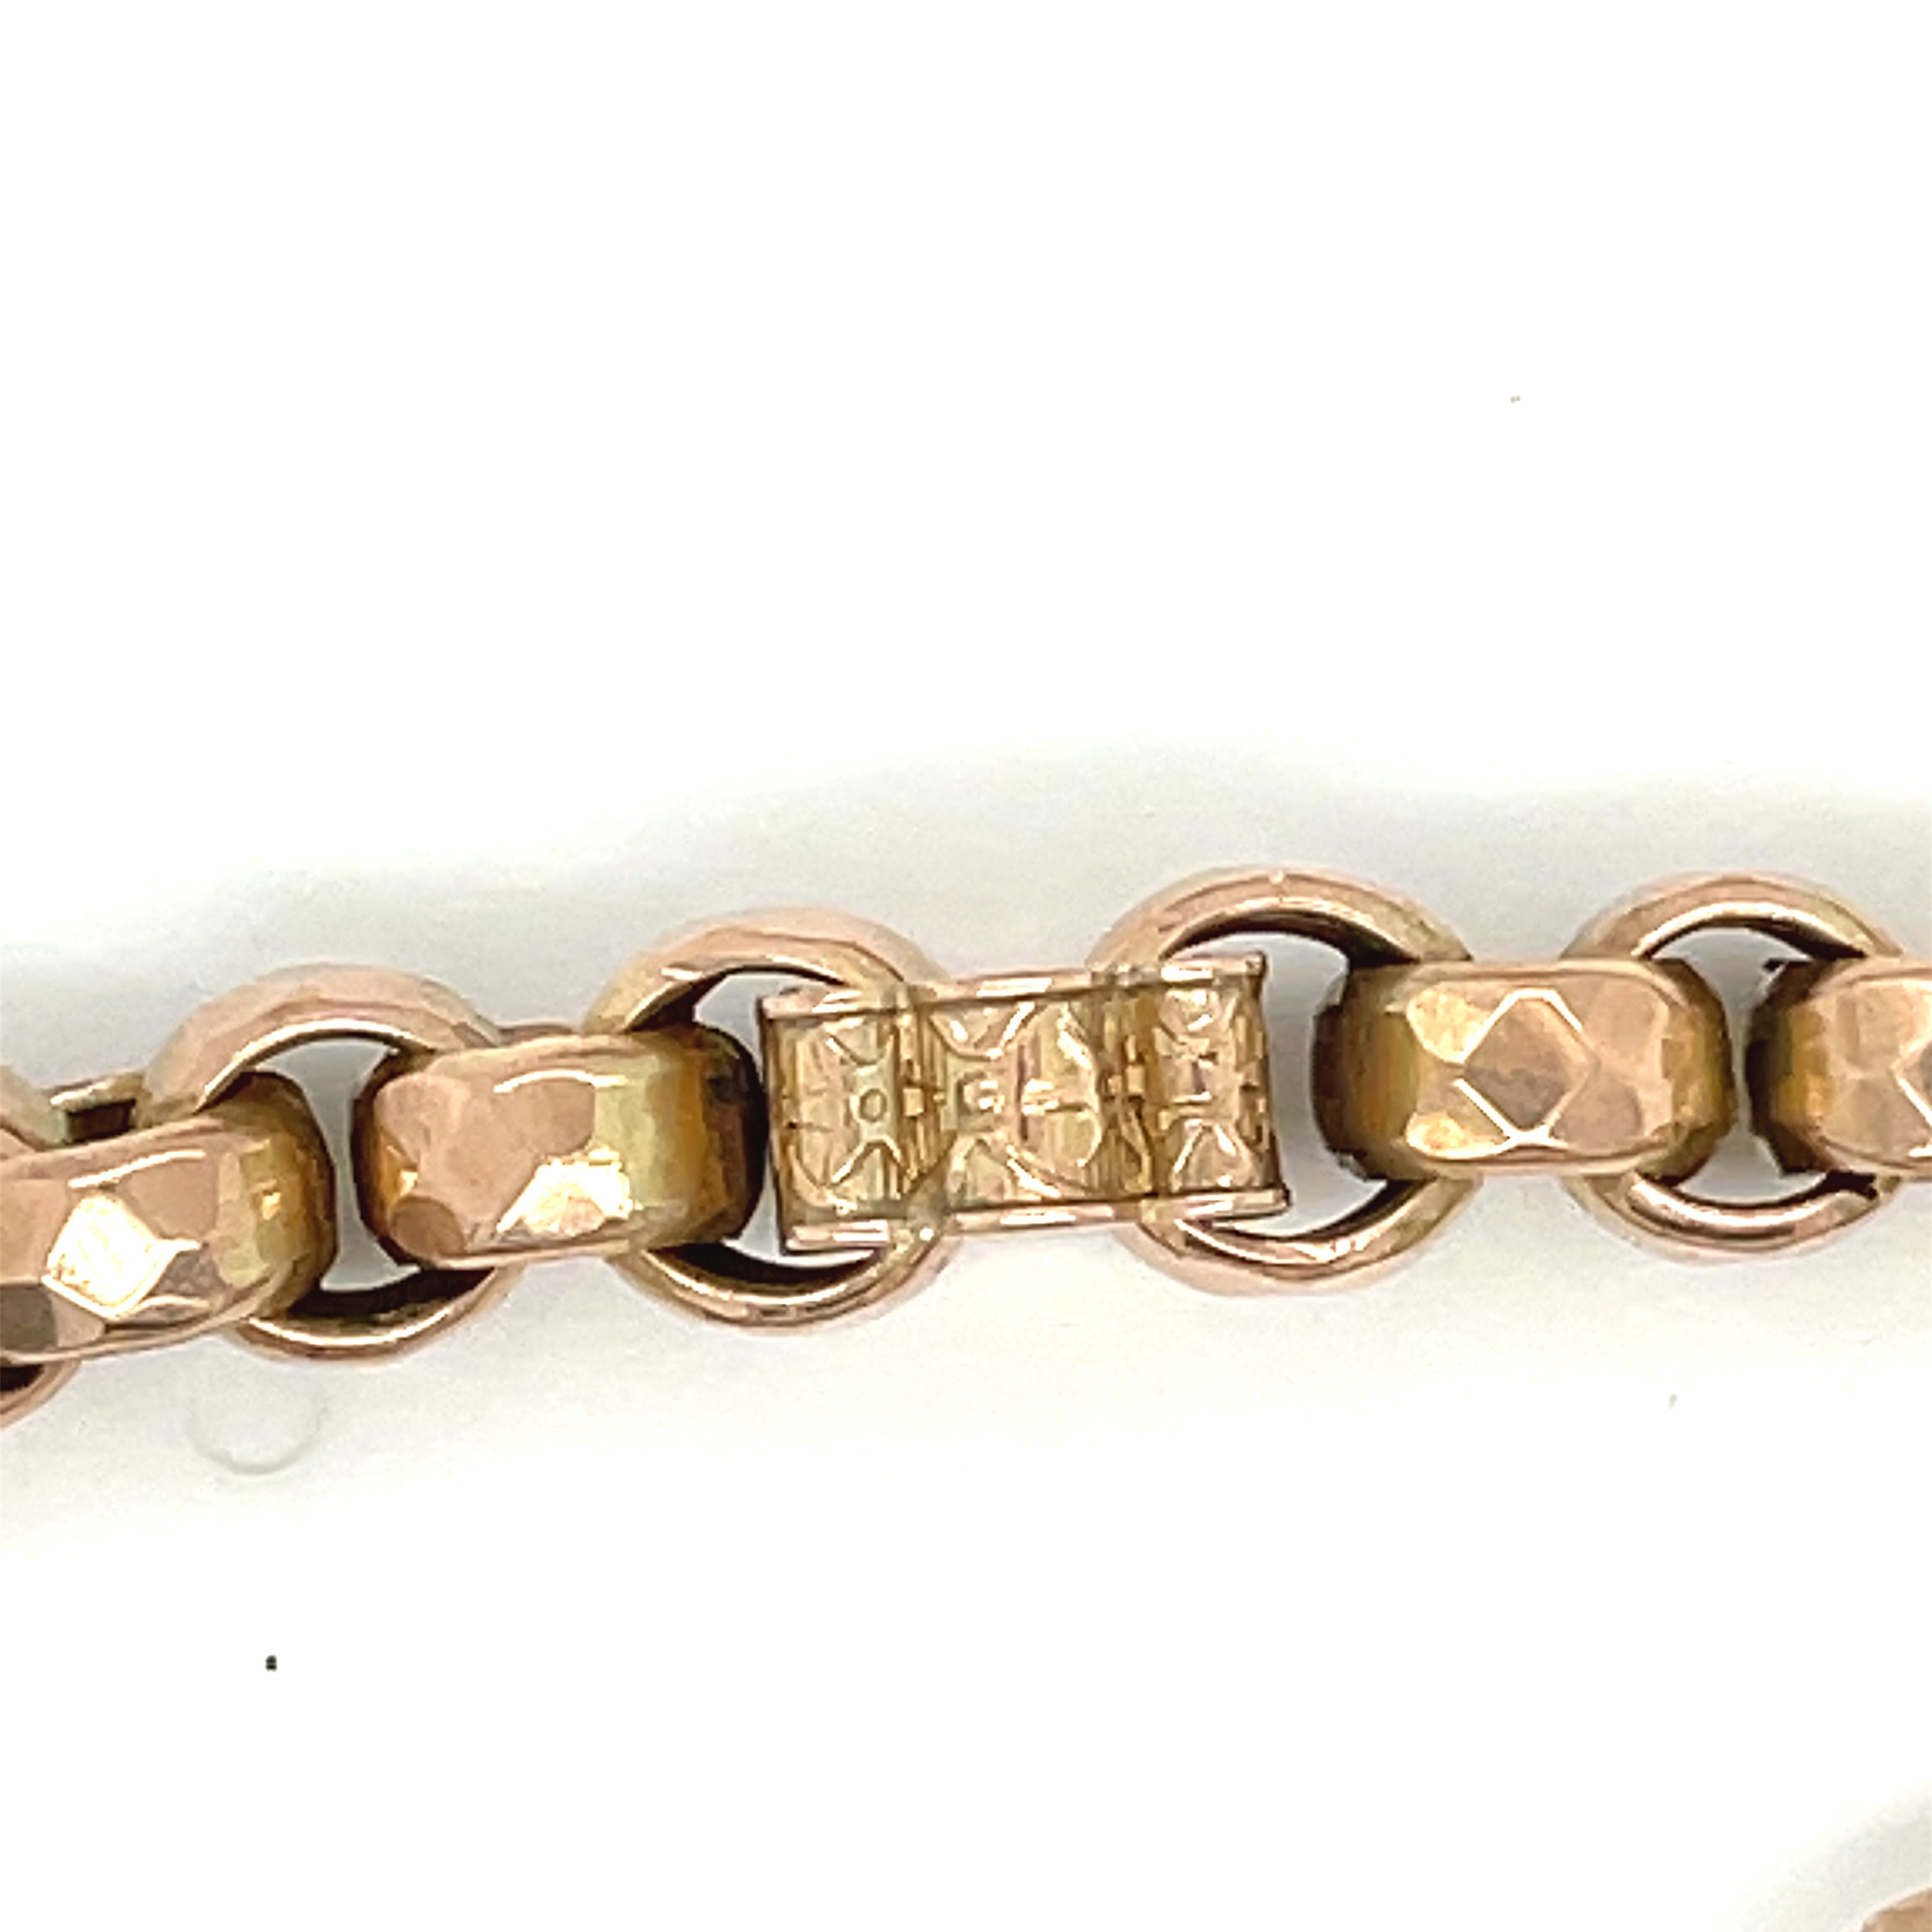 Antique 9ct Gold Watch Chain - 43.5cm long and weighing 28 grams. - Image 3 of 5